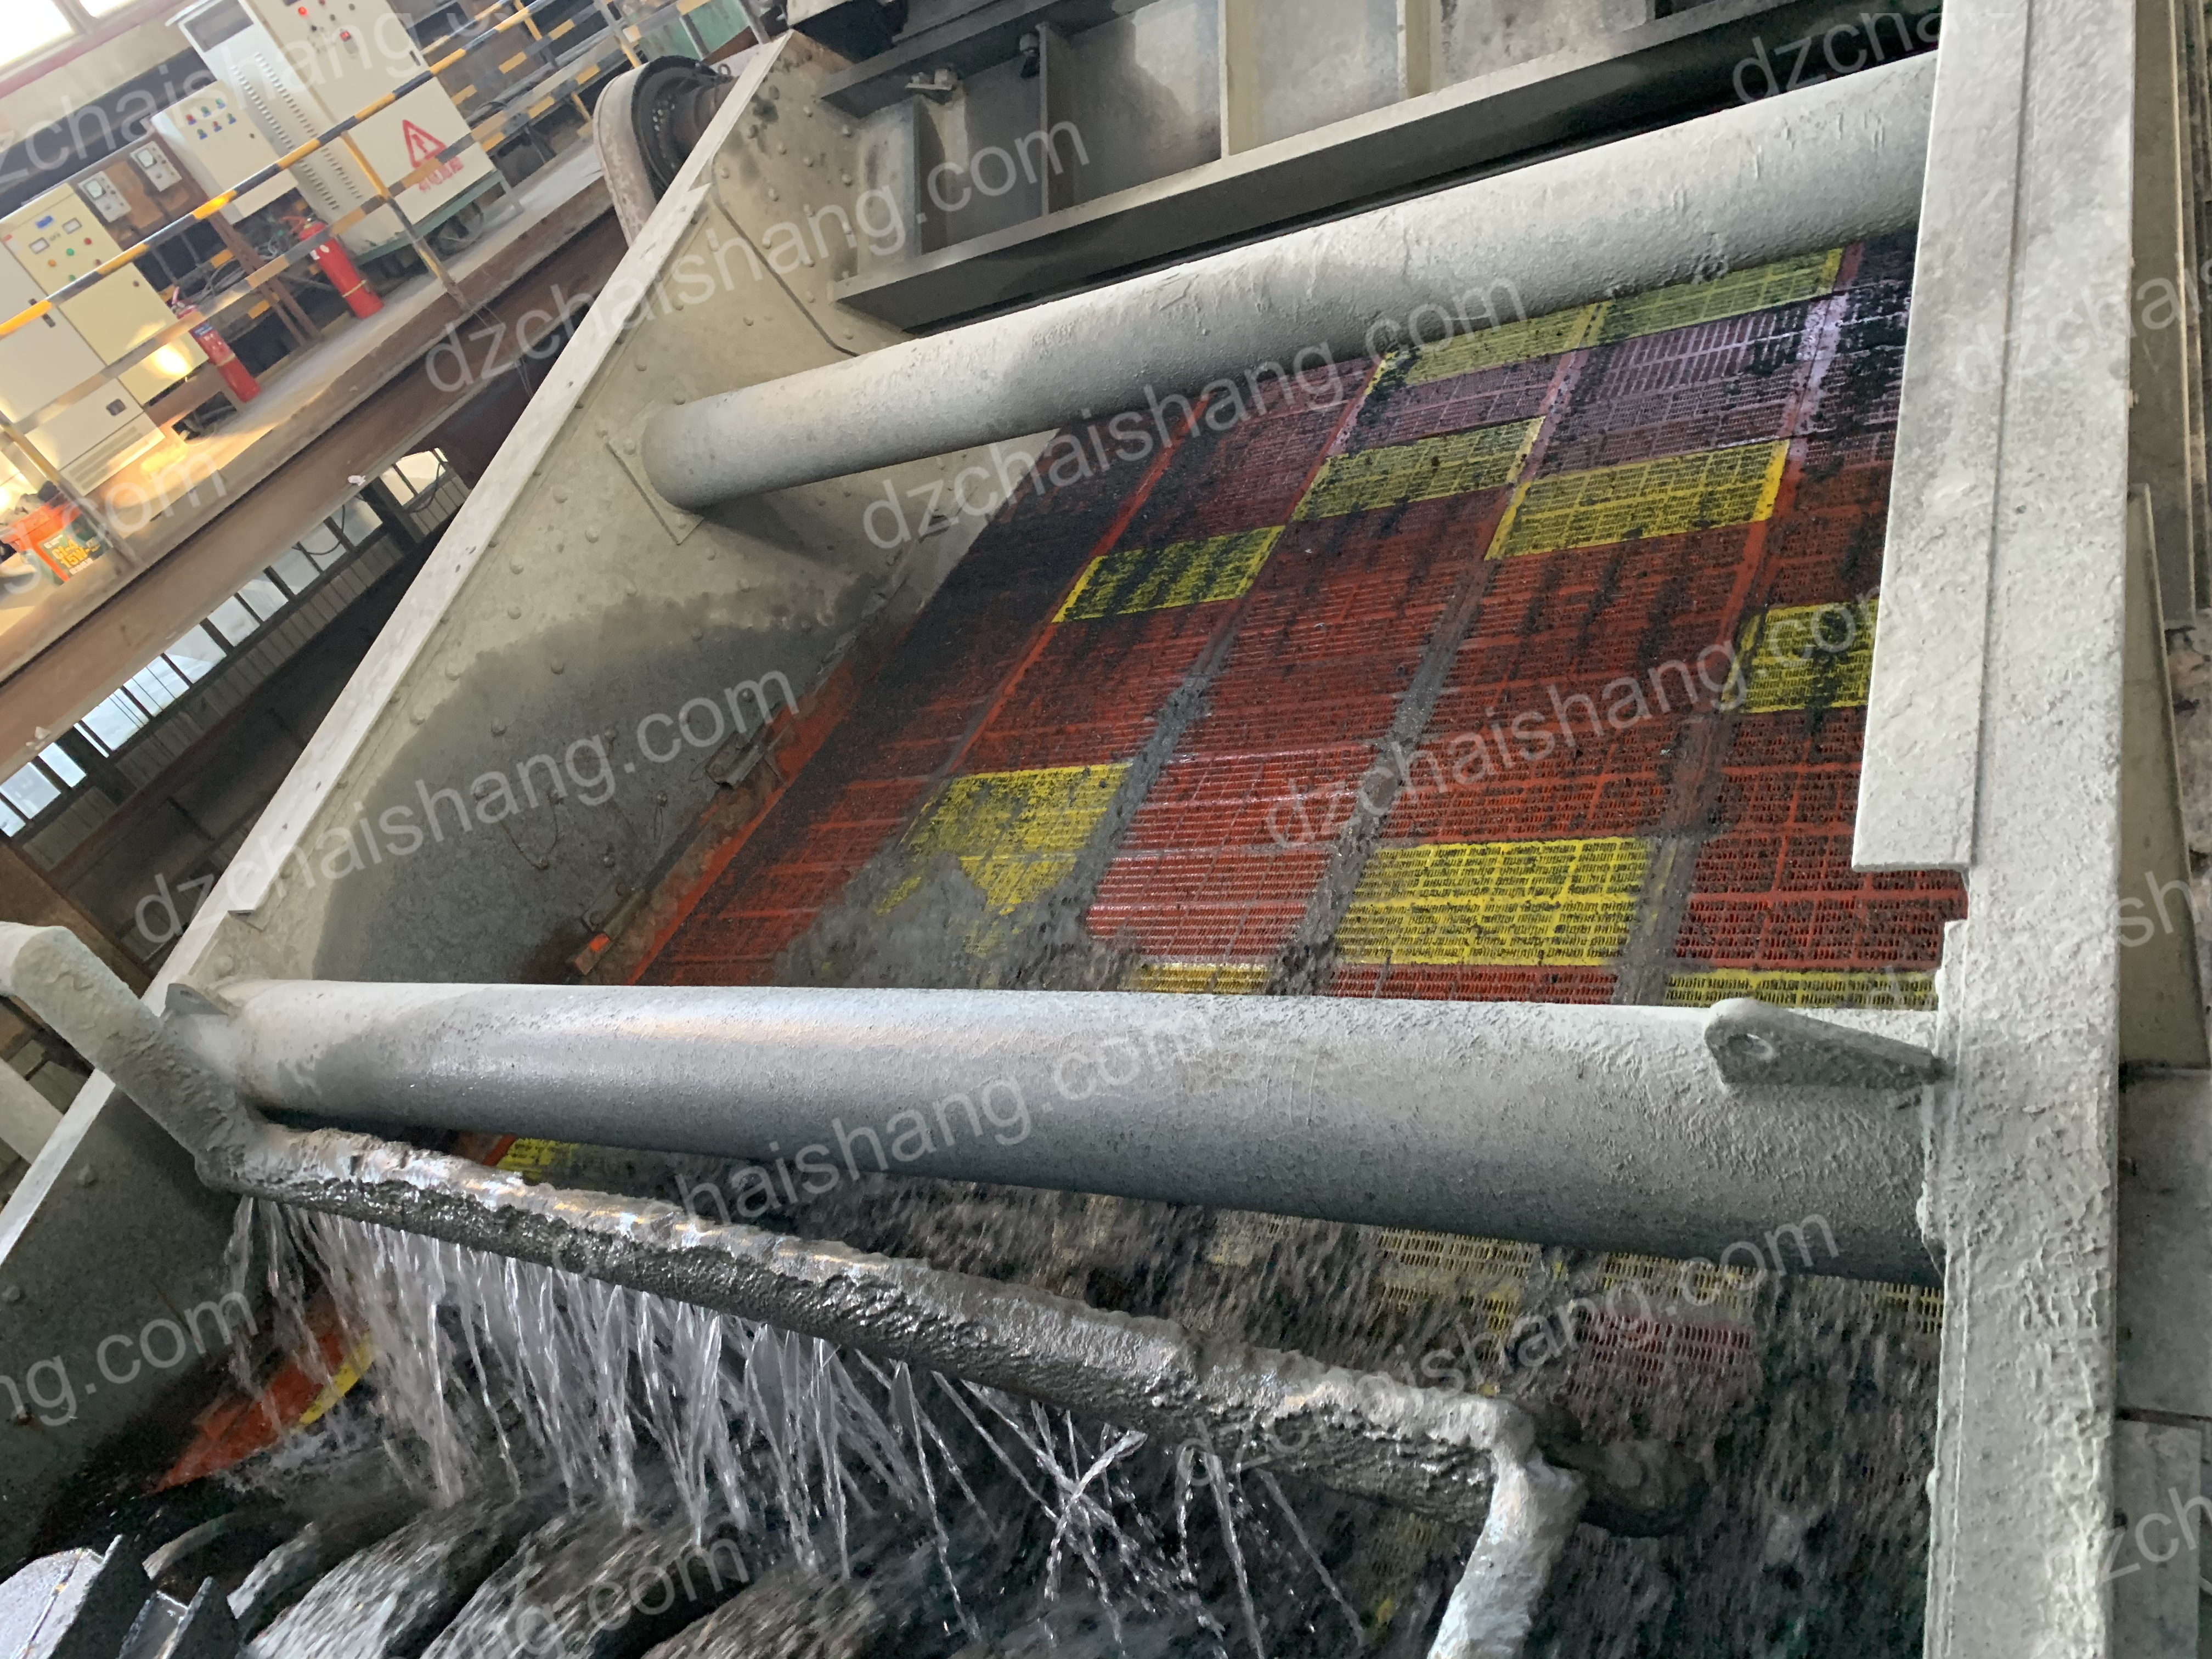 Will using polyurethane screen at very low temperatures cause damage to it?-CHAISHANG | Polyurethane Screen,Rubber Screen PanelsHigh frequency screen mesh,Belt Cleaner,Flotation Cell